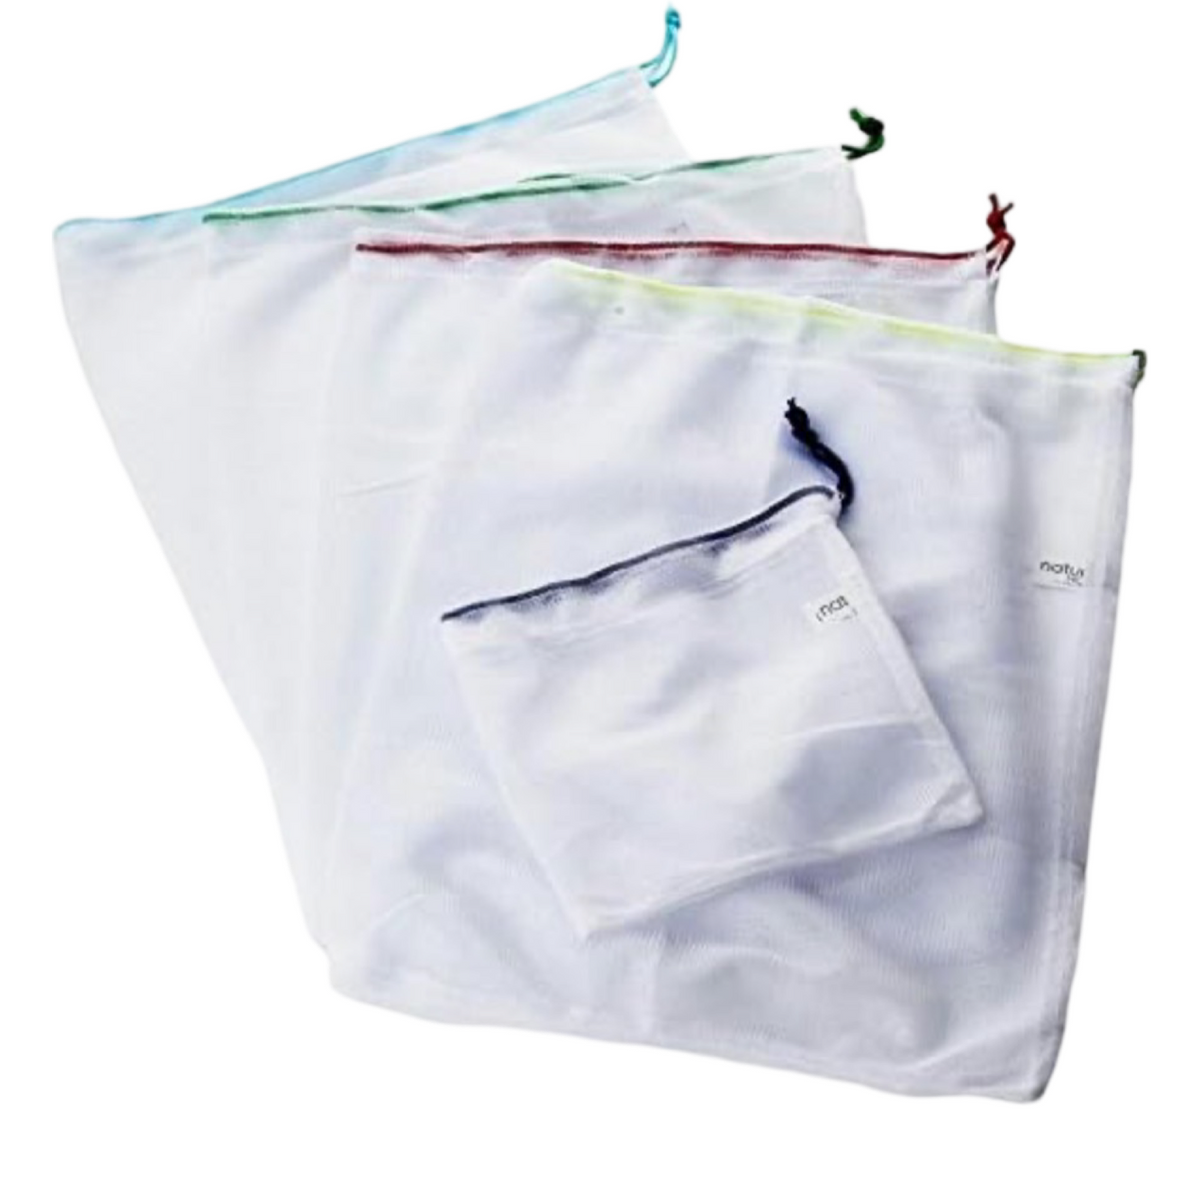 5pk Reusable Drawstring Veggie Bags For Produce By Natural Home